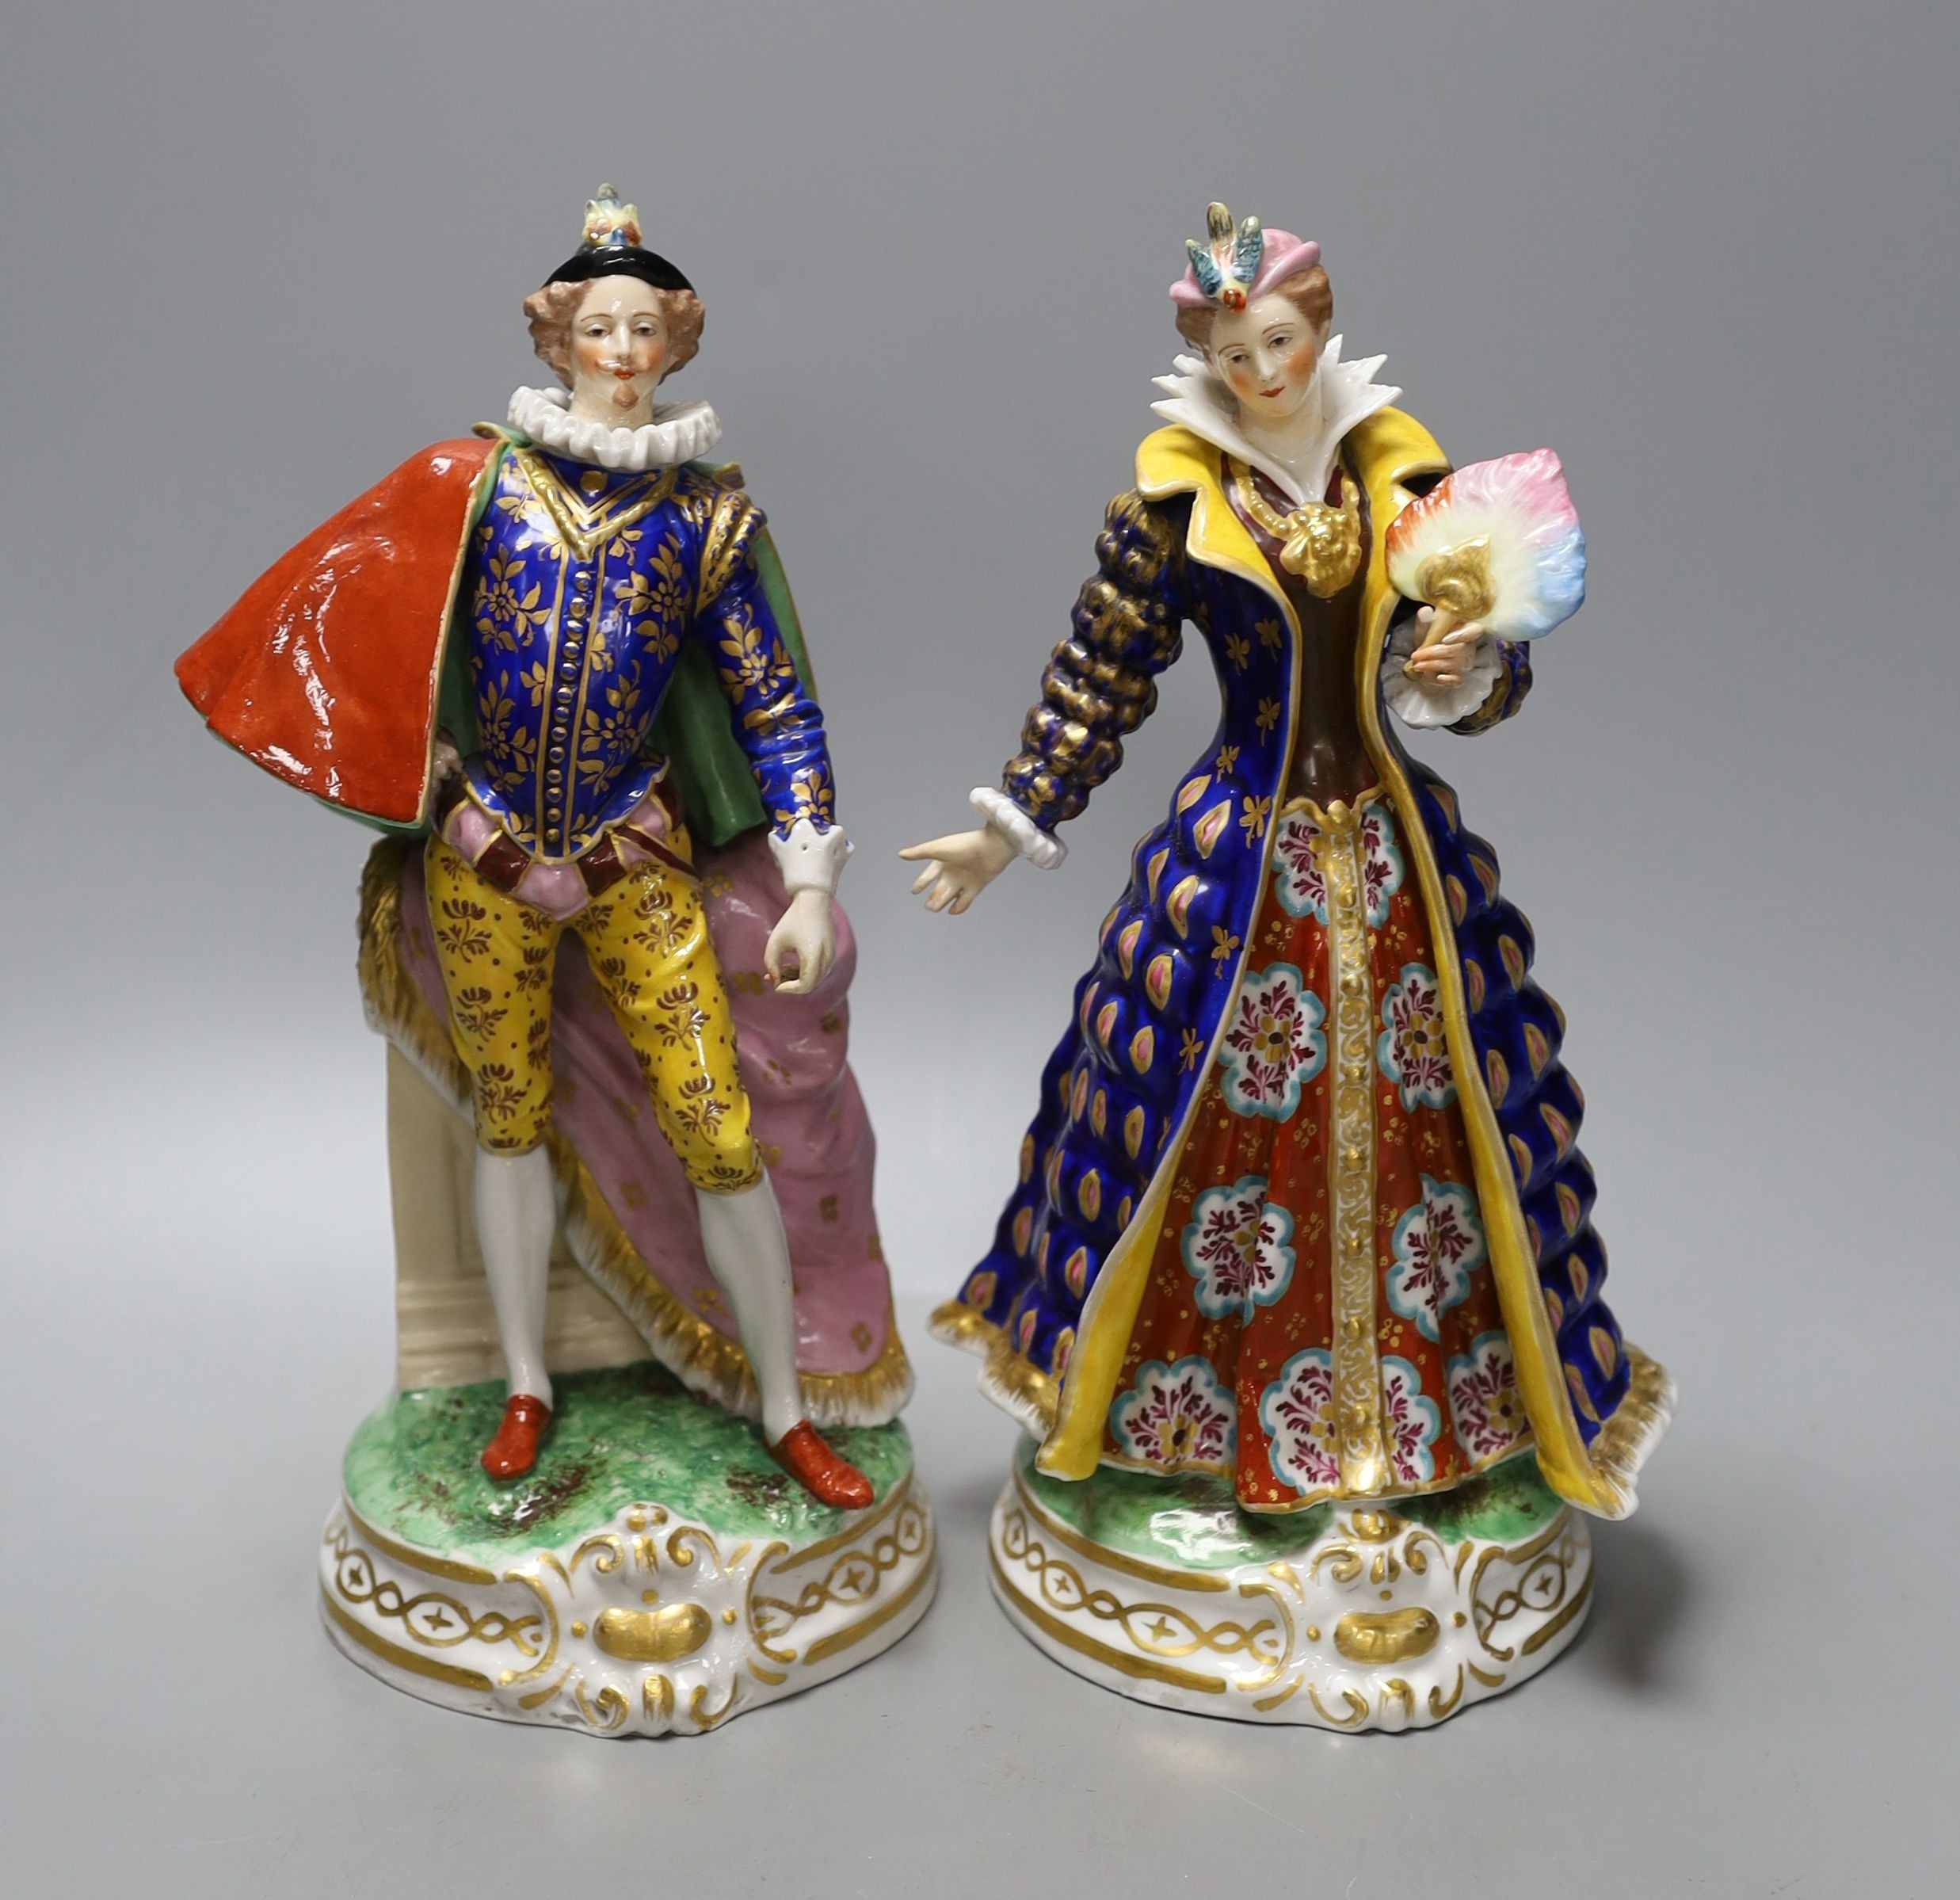 A pair of French porcelain court figures - 25cm tall